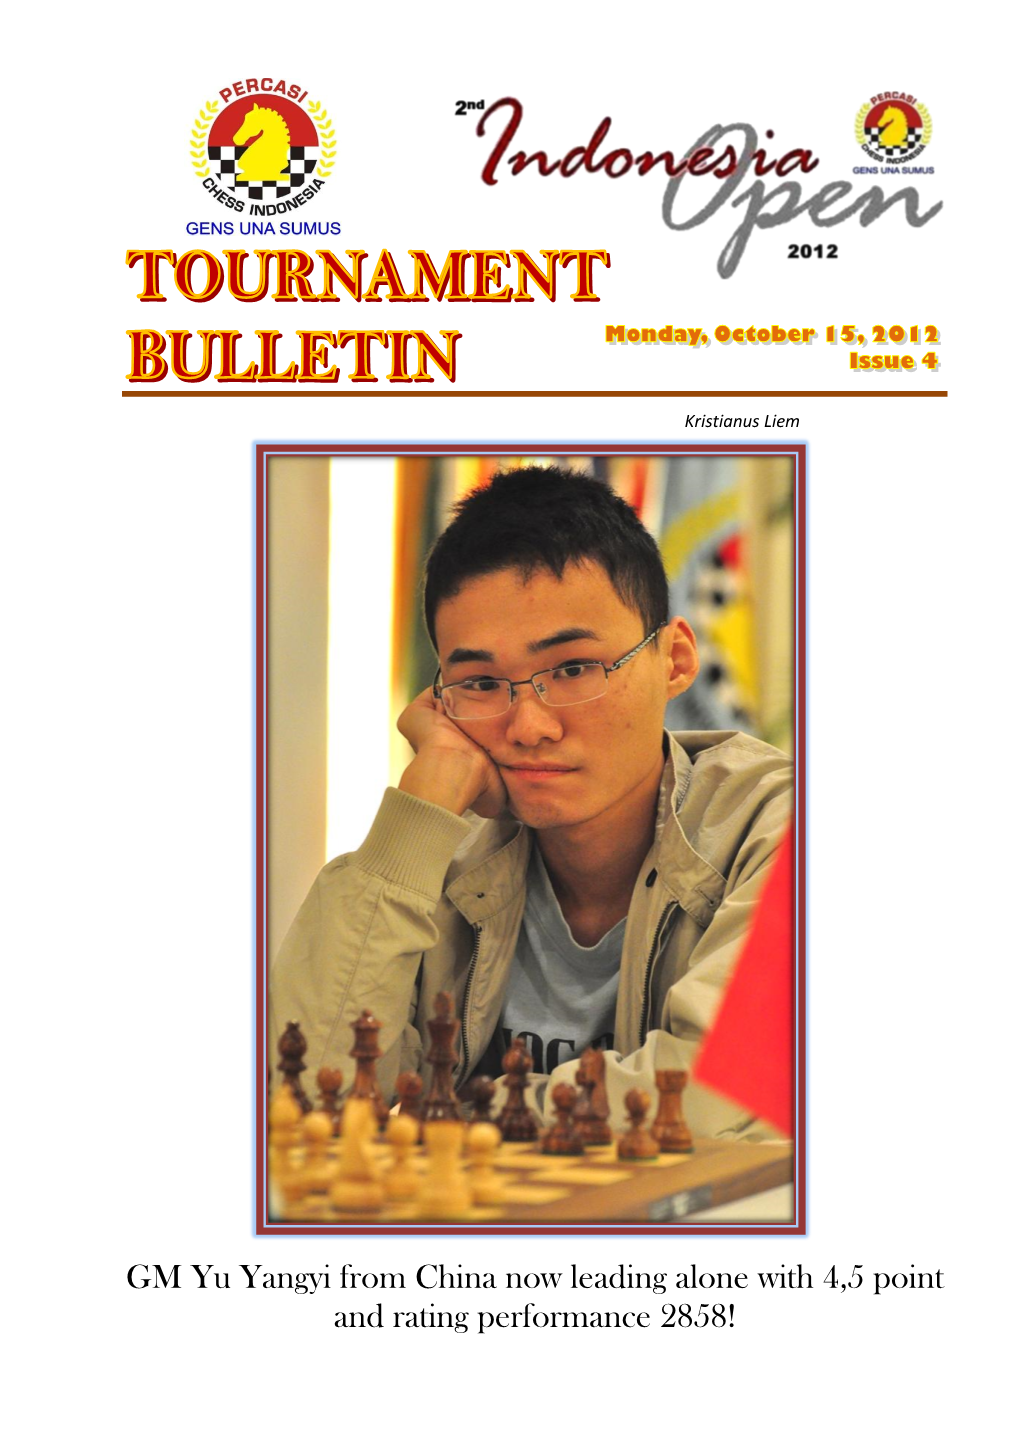 GM Yu Yangyi from China Now Leading Alone with 4,5 Point and Rating Performance 2858! 2Nd Indonesia Open Chess Championship 2012